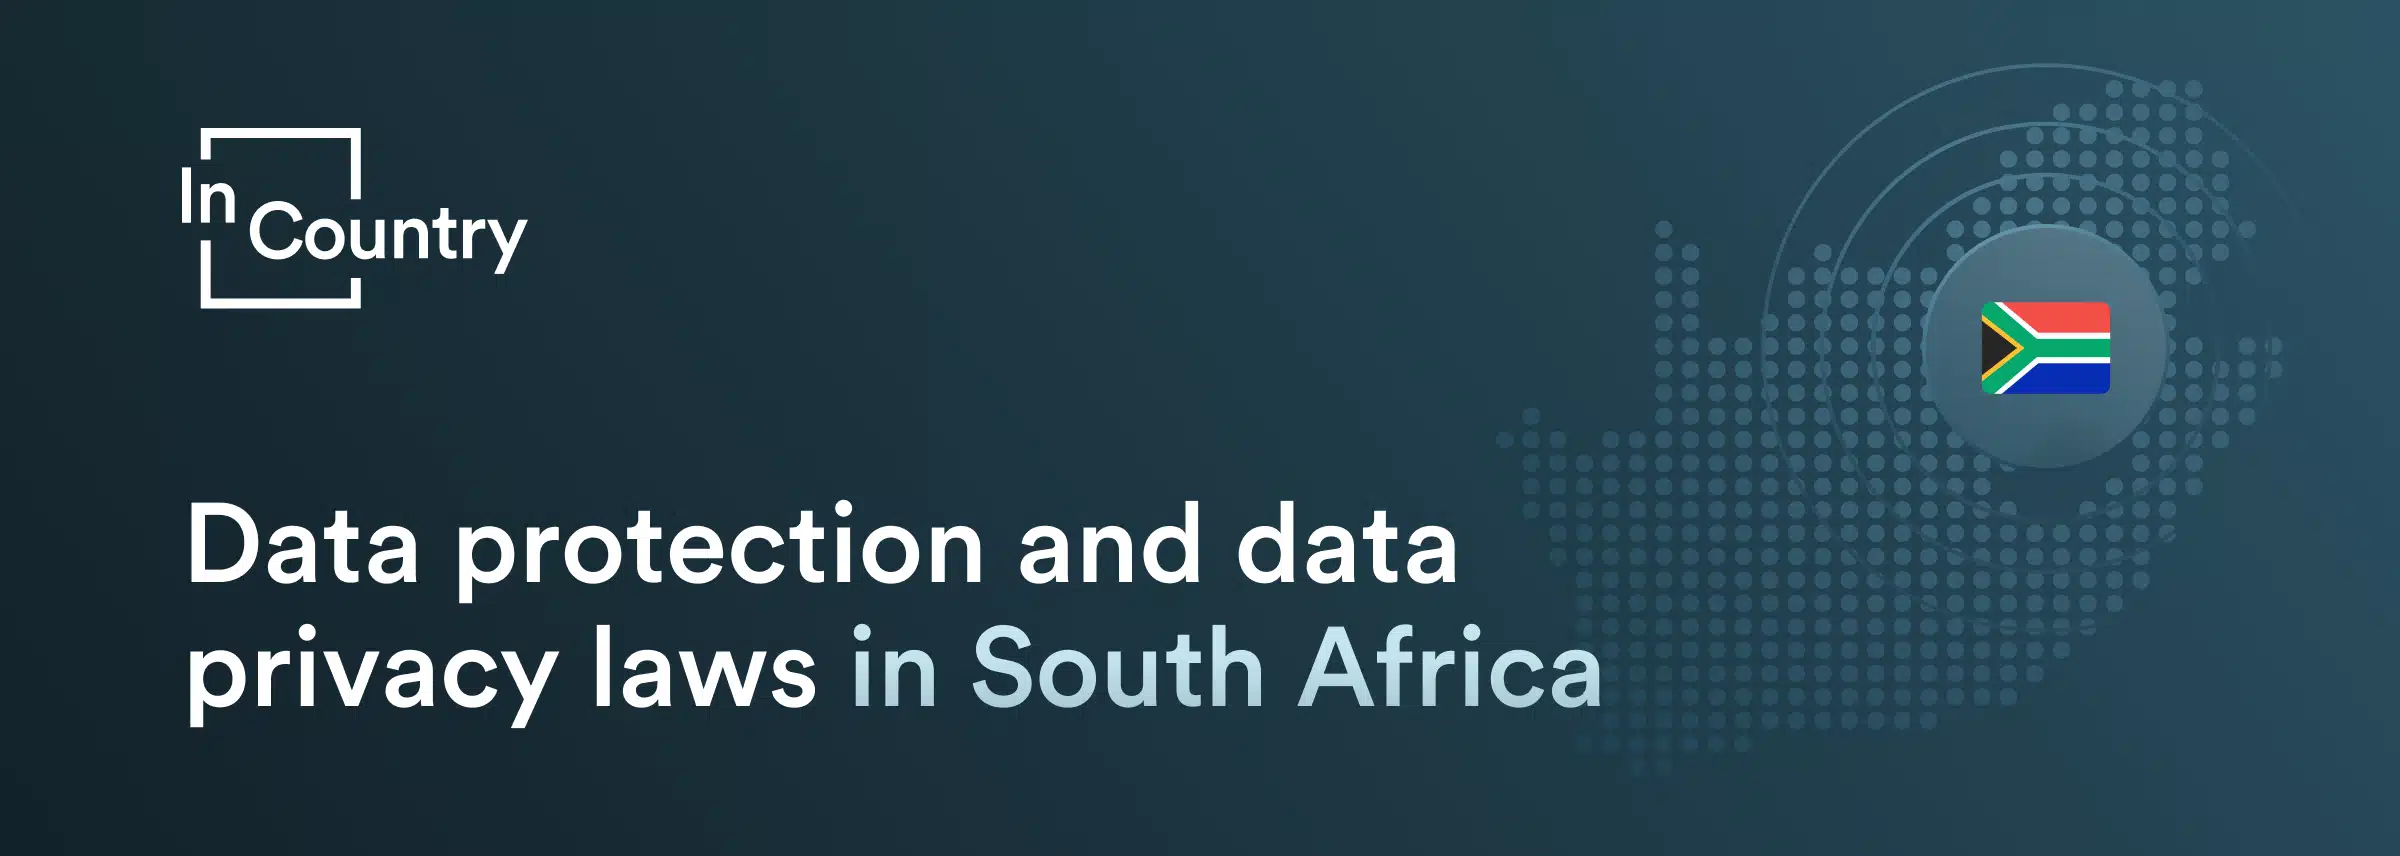 Data protection and data privacy laws in South Africa